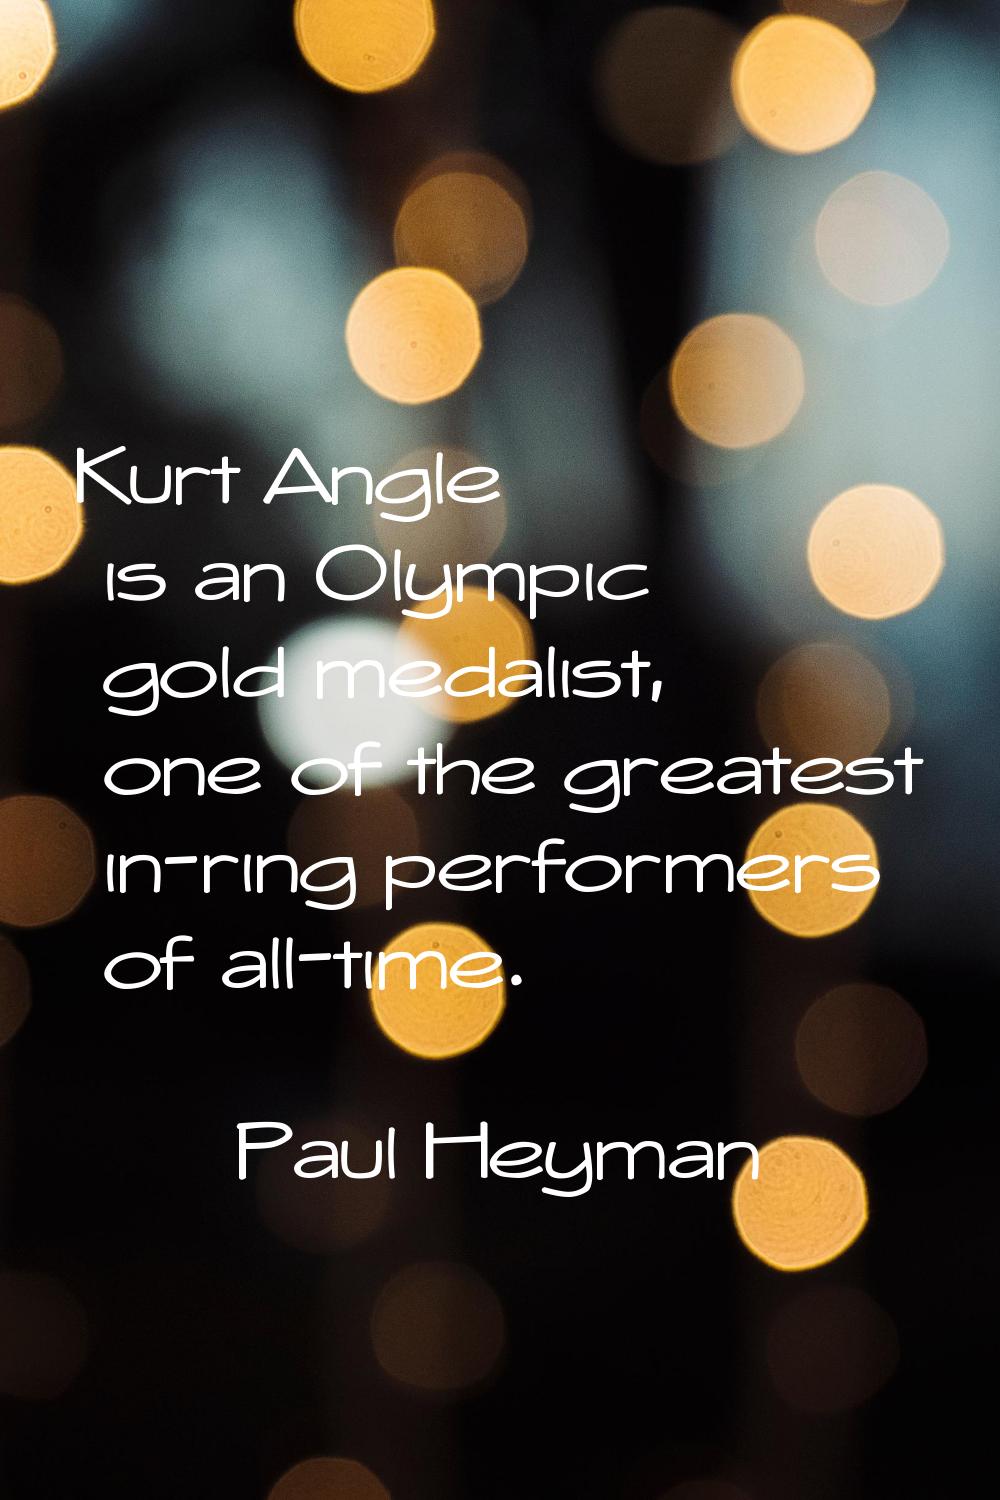 Kurt Angle is an Olympic gold medalist, one of the greatest in-ring performers of all-time.